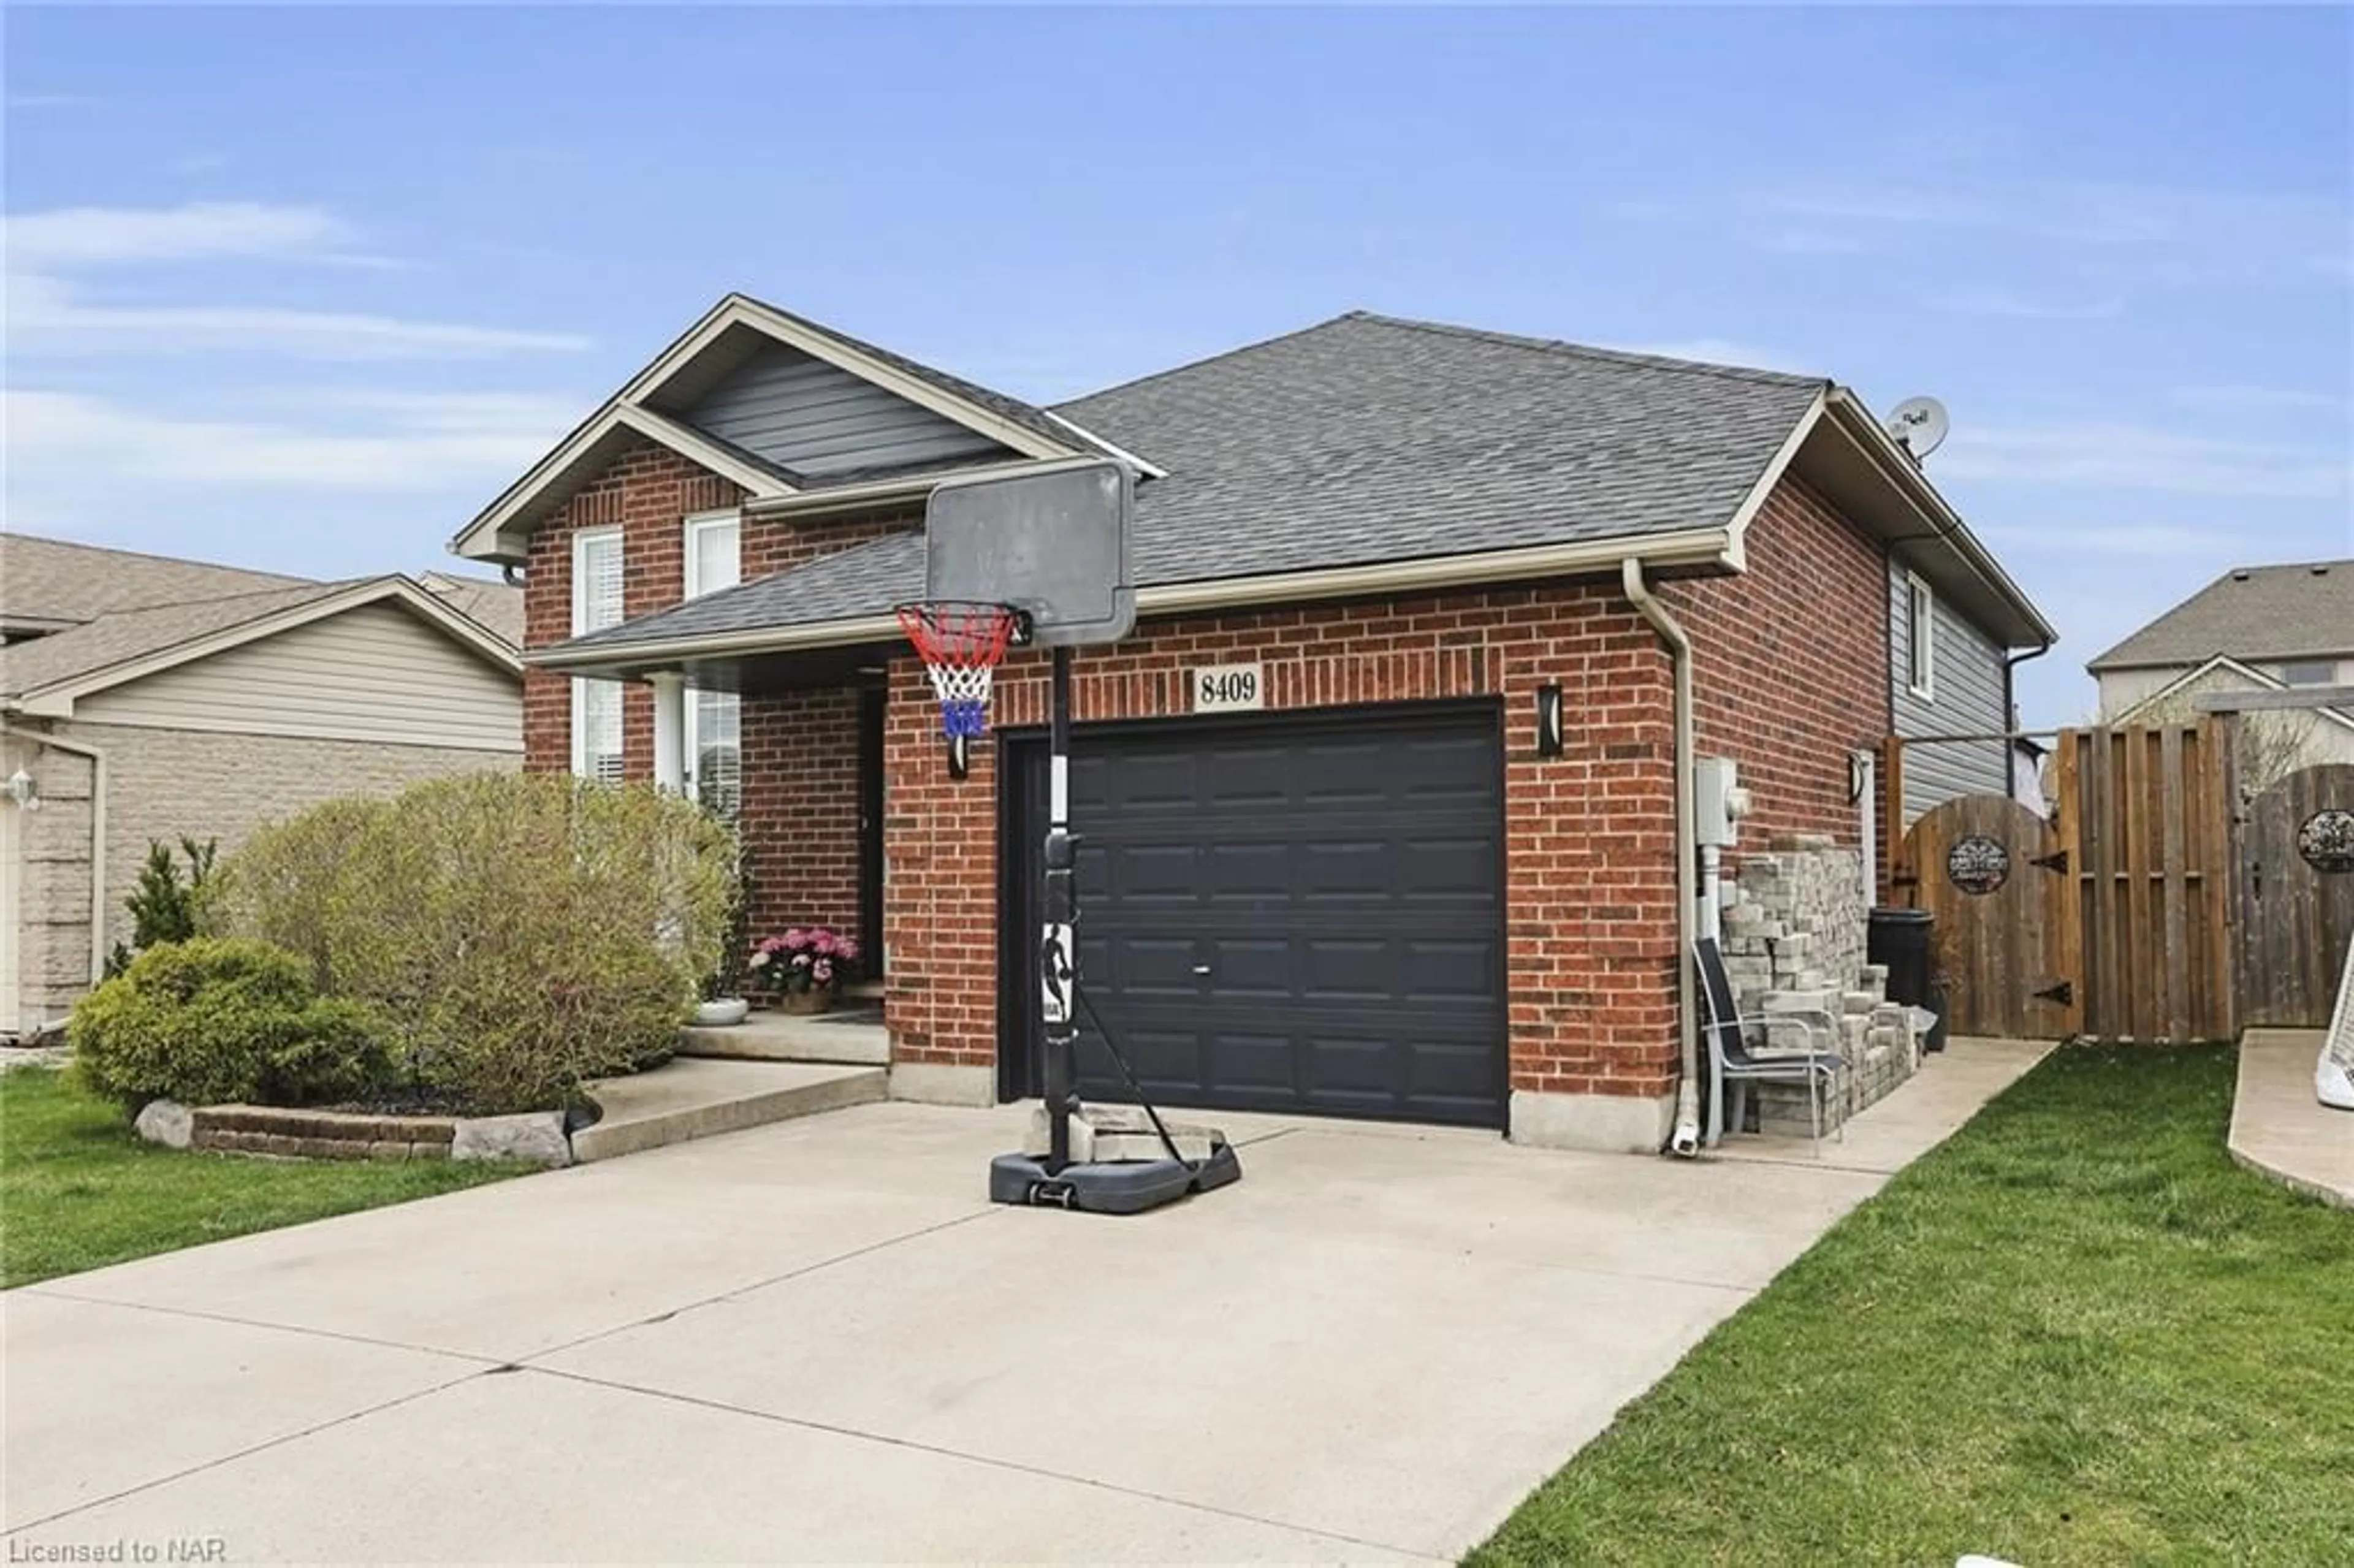 Home with brick exterior material for 8409 Greenfield Cres, Niagara Falls Ontario L2H 3J8